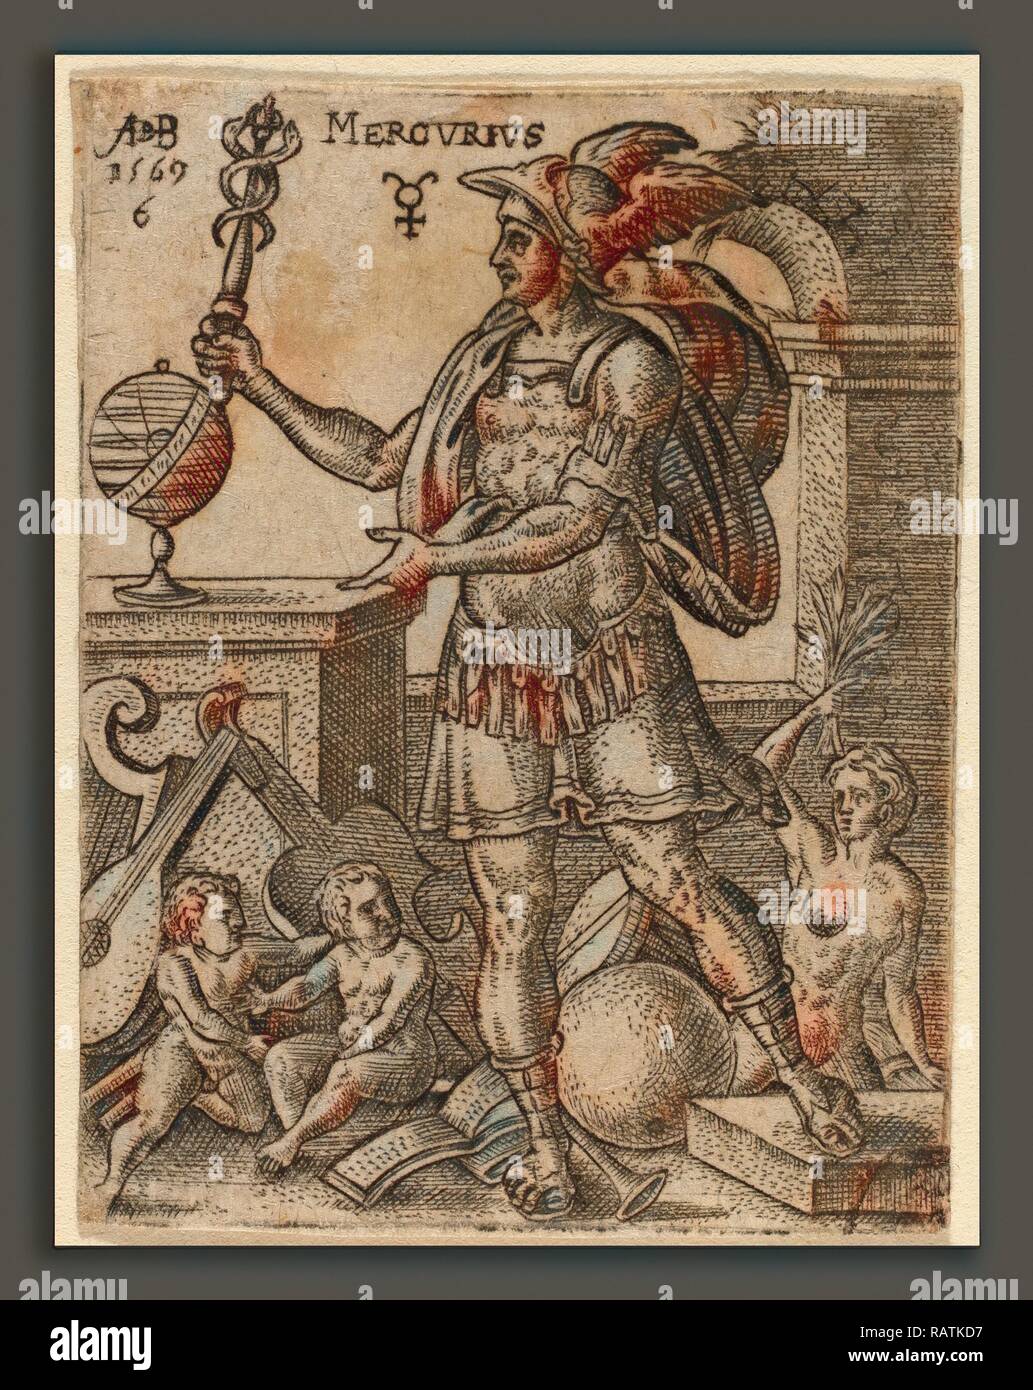 Abraham de Bruyn (Flemish, 1540 - 1587), Mercury, 1569, engraving. Reimagined by Gibon. Classic art with a modern reimagined Stock Photo